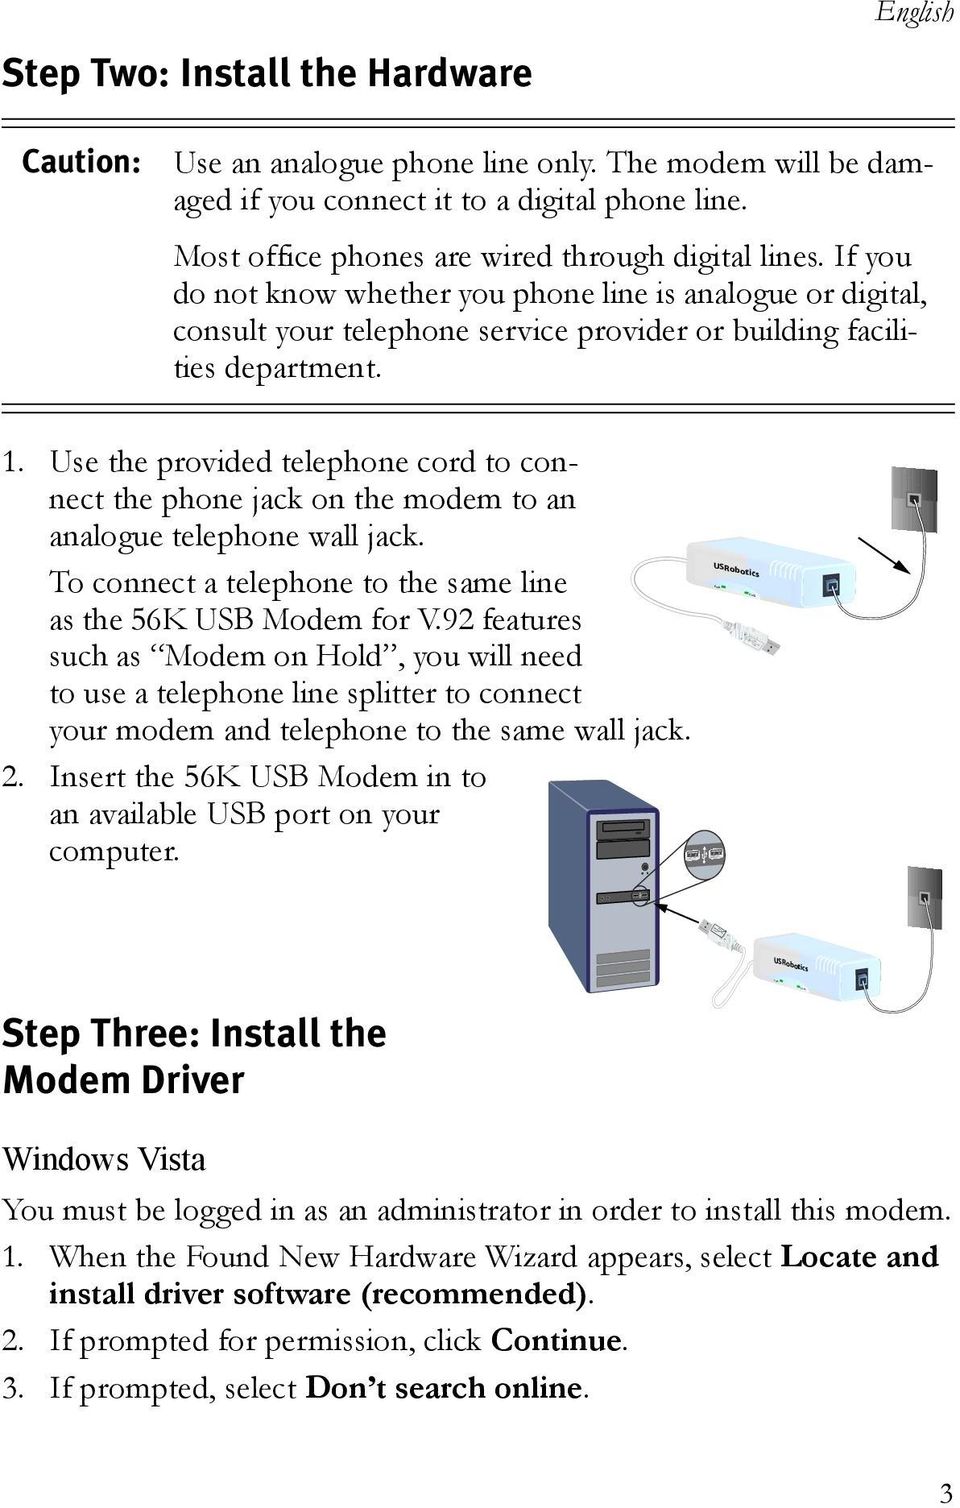 Use the provided telephone cord to connect the phone jack on the modem to an analogue telephone wall jack. To connect a telephone to the same line as the 56K USB Modem for V.